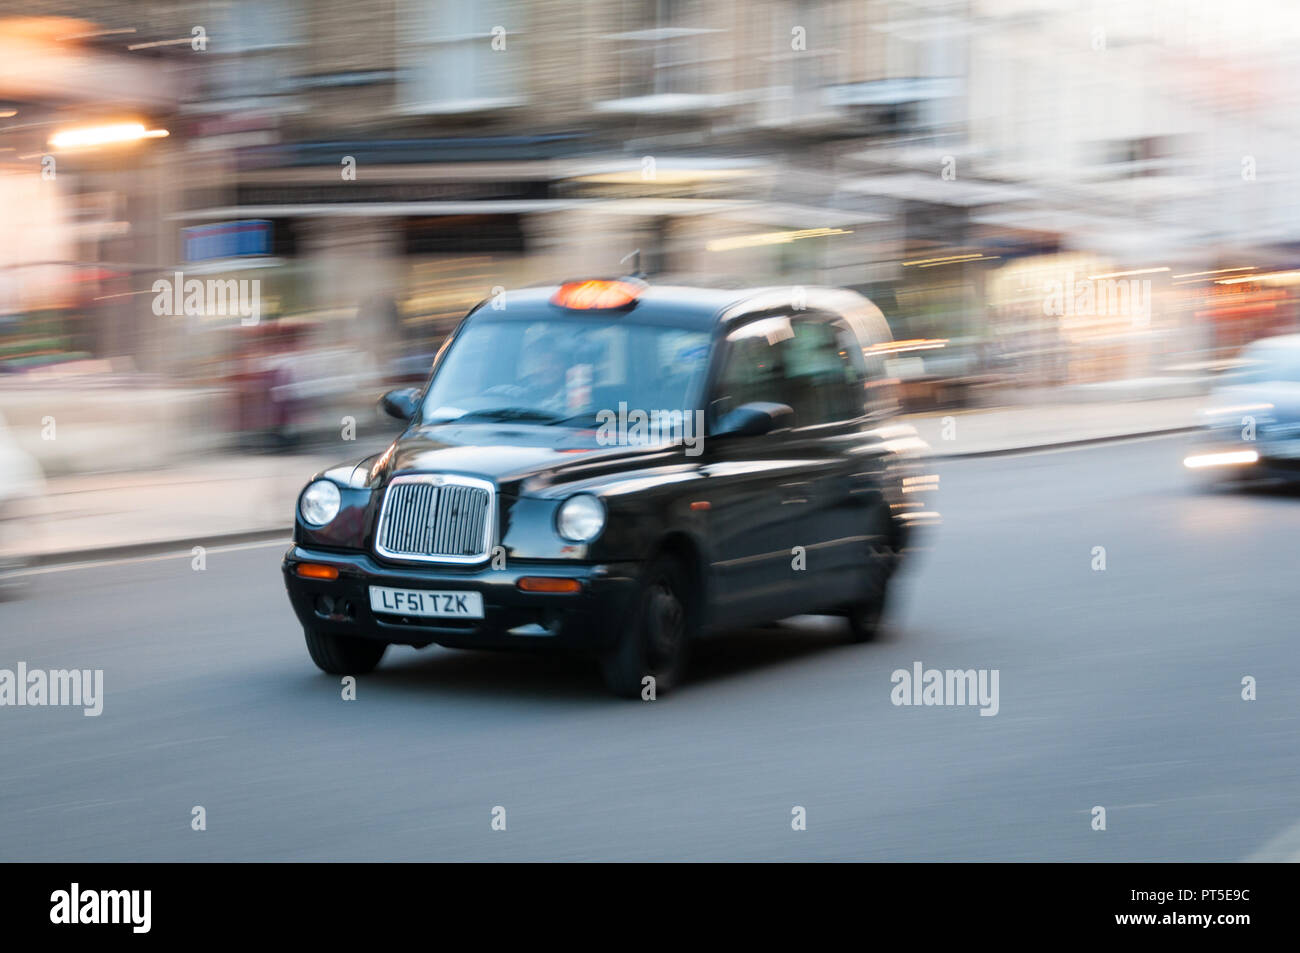 Moving London black cab taxi in street Stock Photo